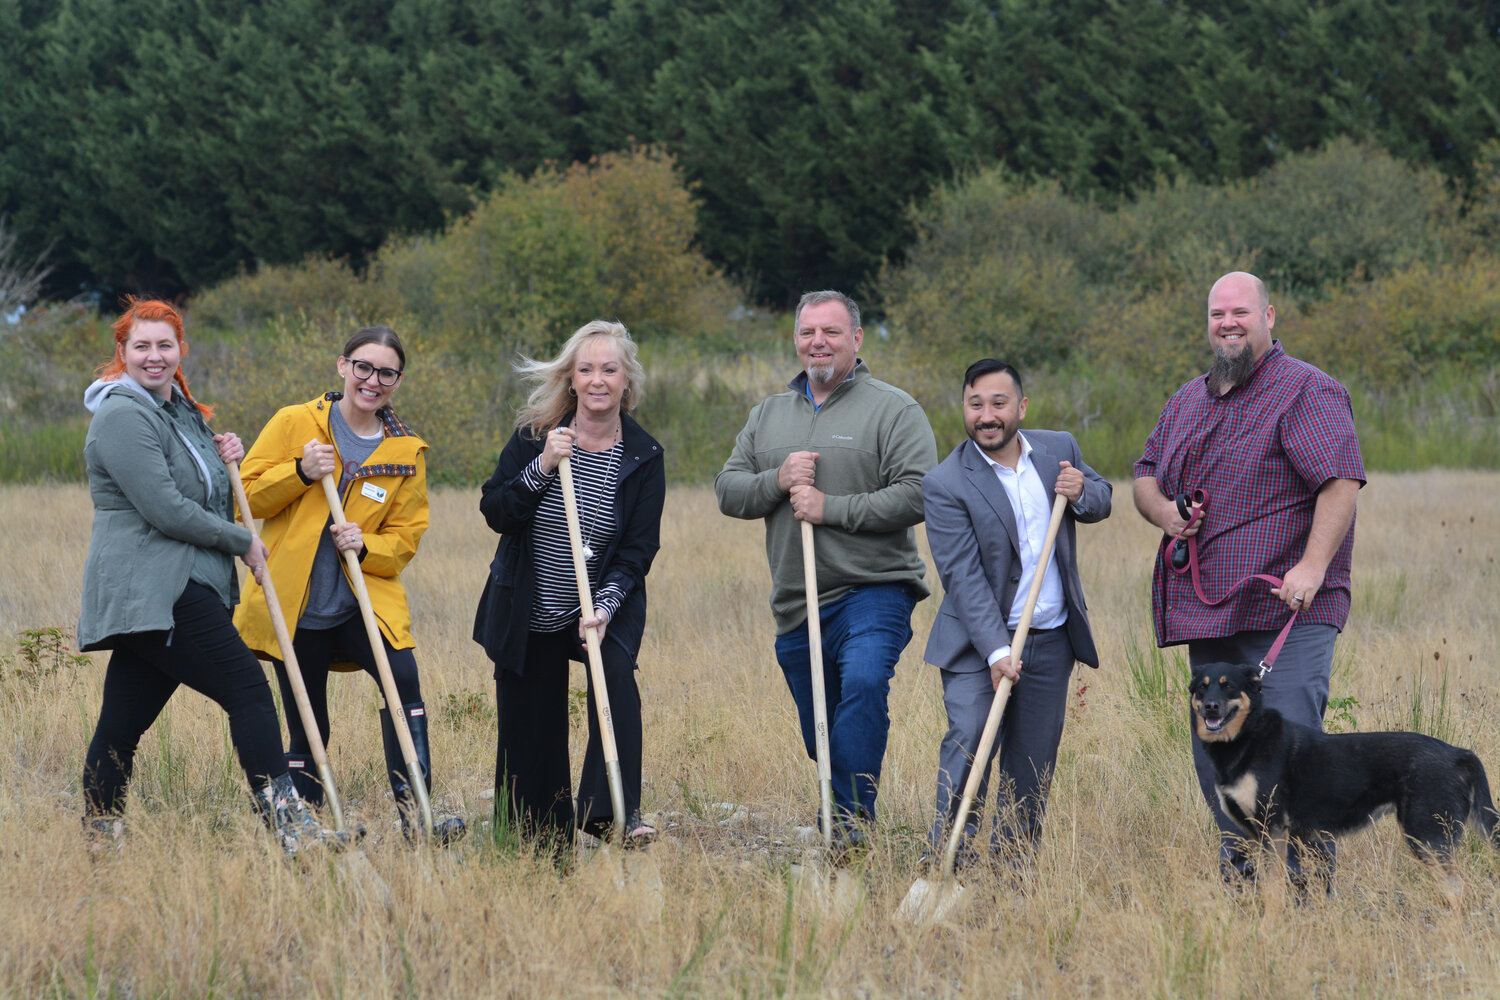 Representatives from the City of Yelm smile as they break ground at Yelm’s future off-leash dog park site.